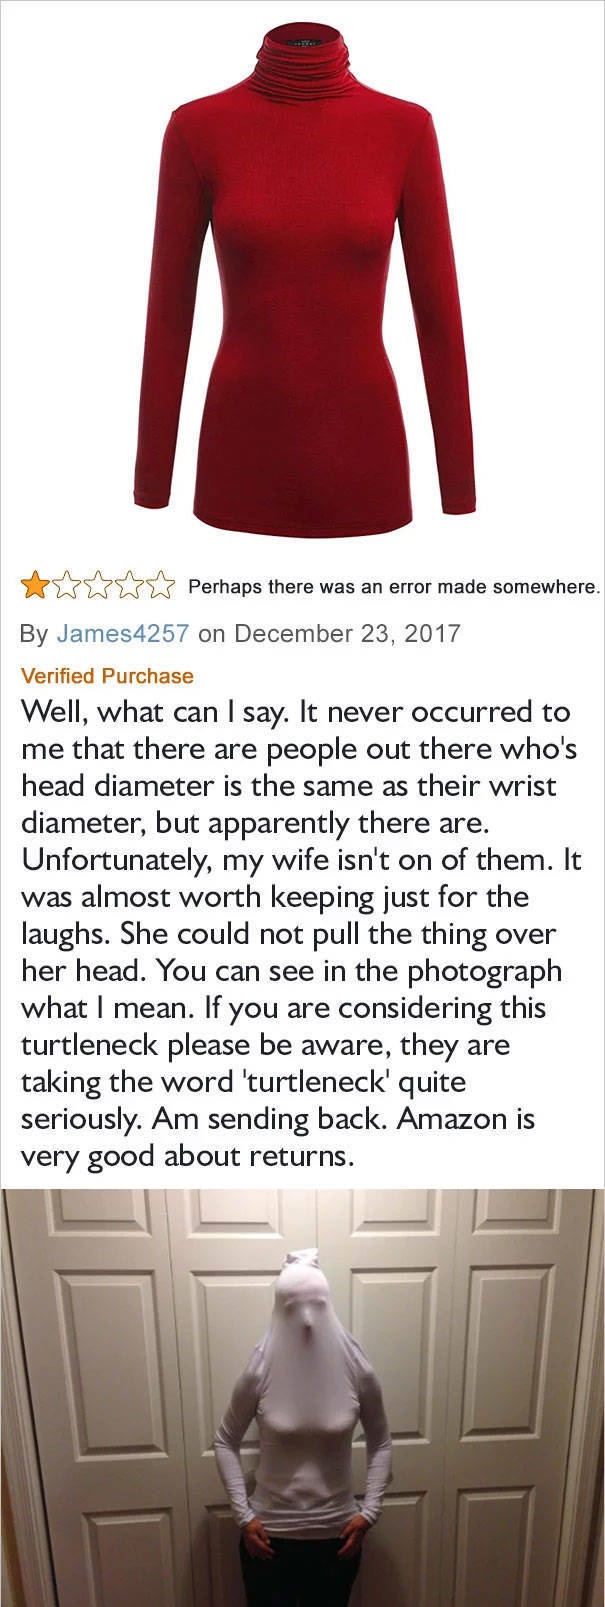 amazon reviews - sleeve - Lili w erhaps there was an error made somewhere. By James4257 on Verified Purchase Well, what can I say. It never occurred to me that there are people out there who's head diameter is the same as their wrist diameter, but apparen